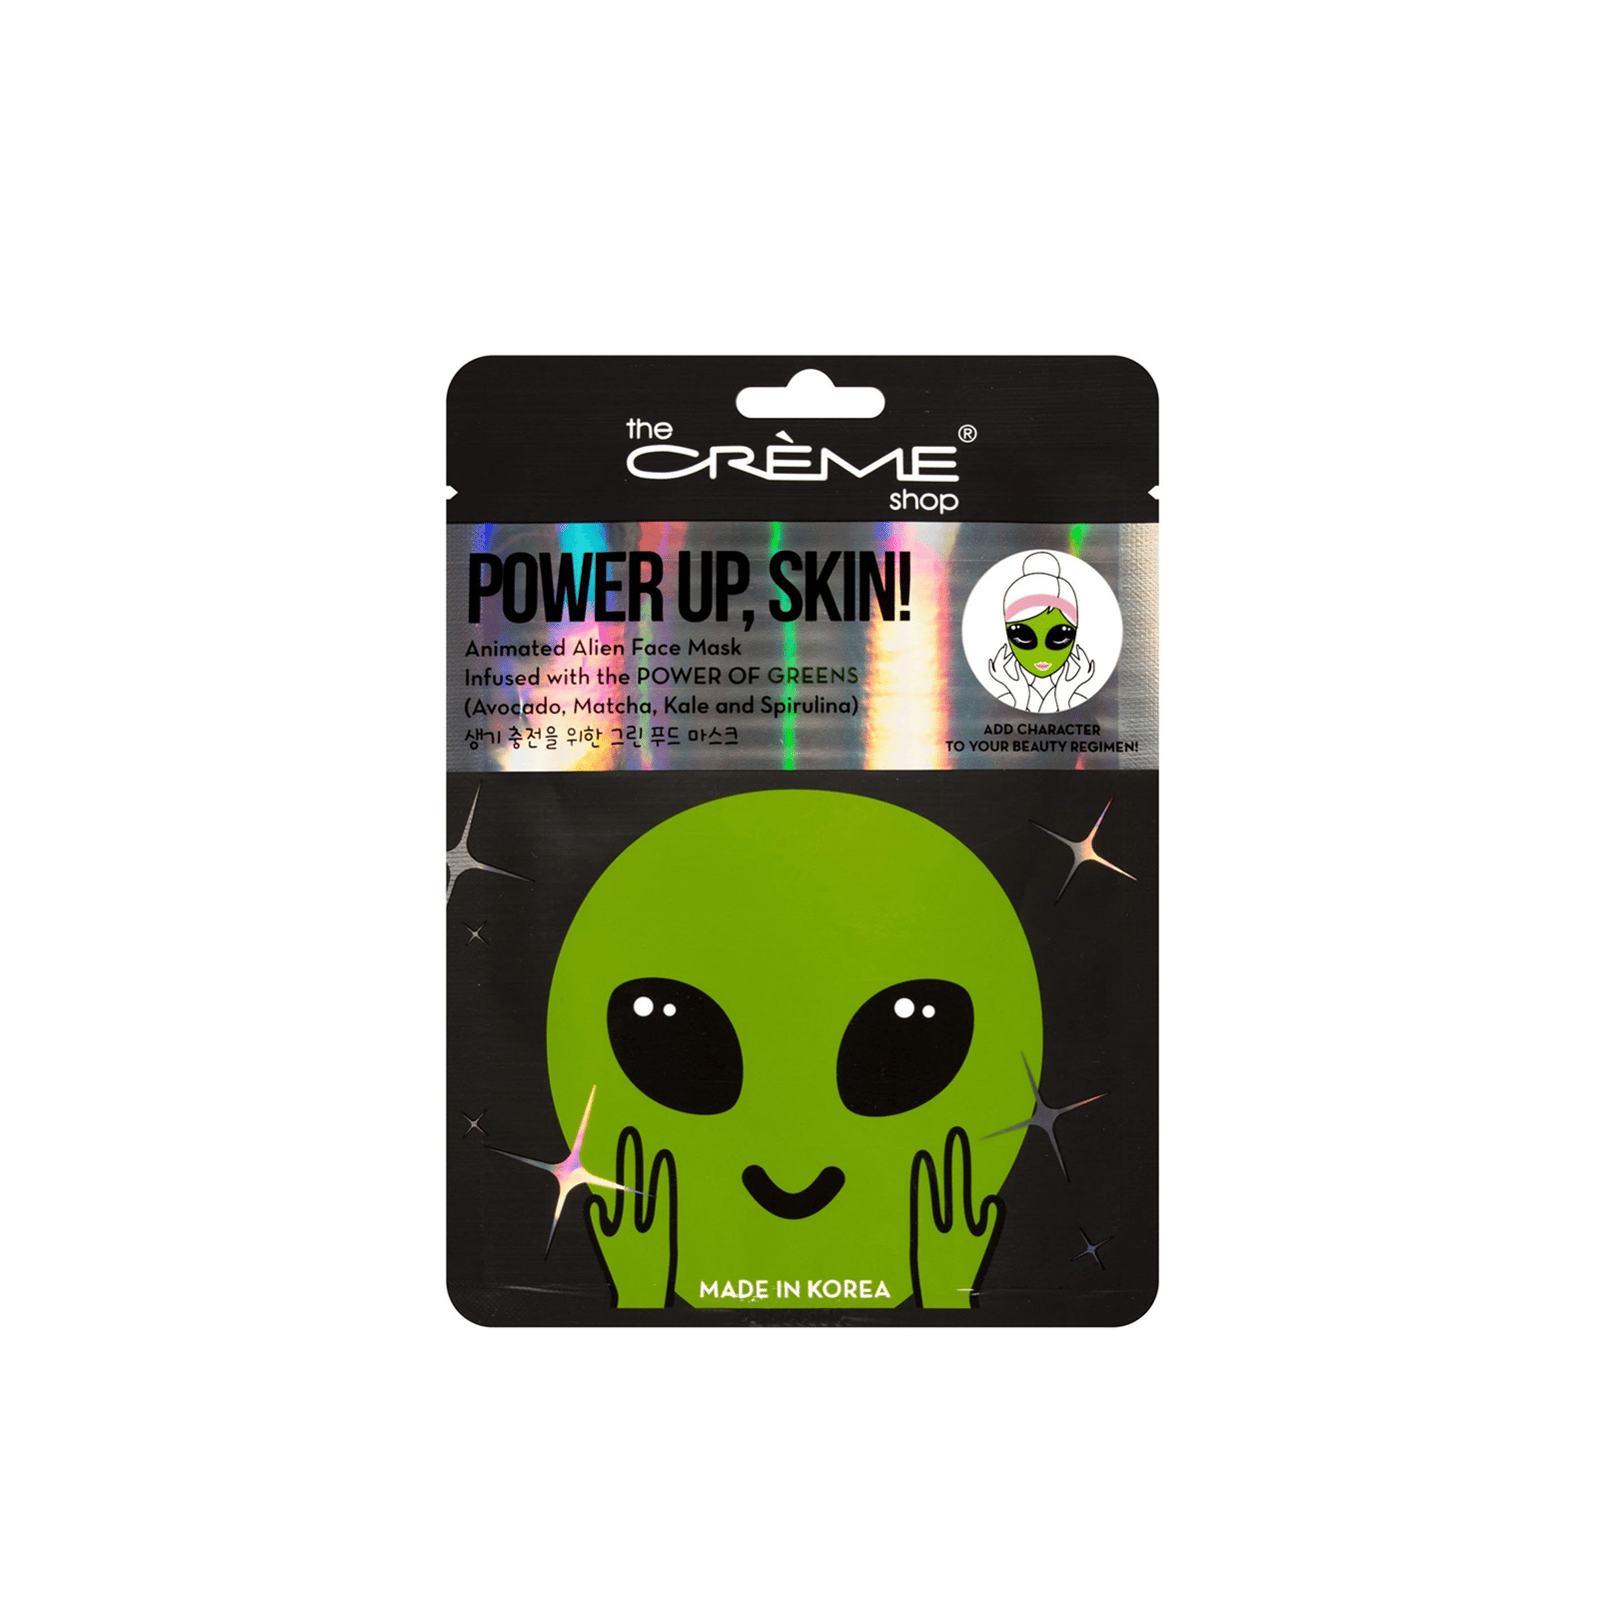 The Crème Shop Power Up, Skin! Animated Alien Face Mask 25g